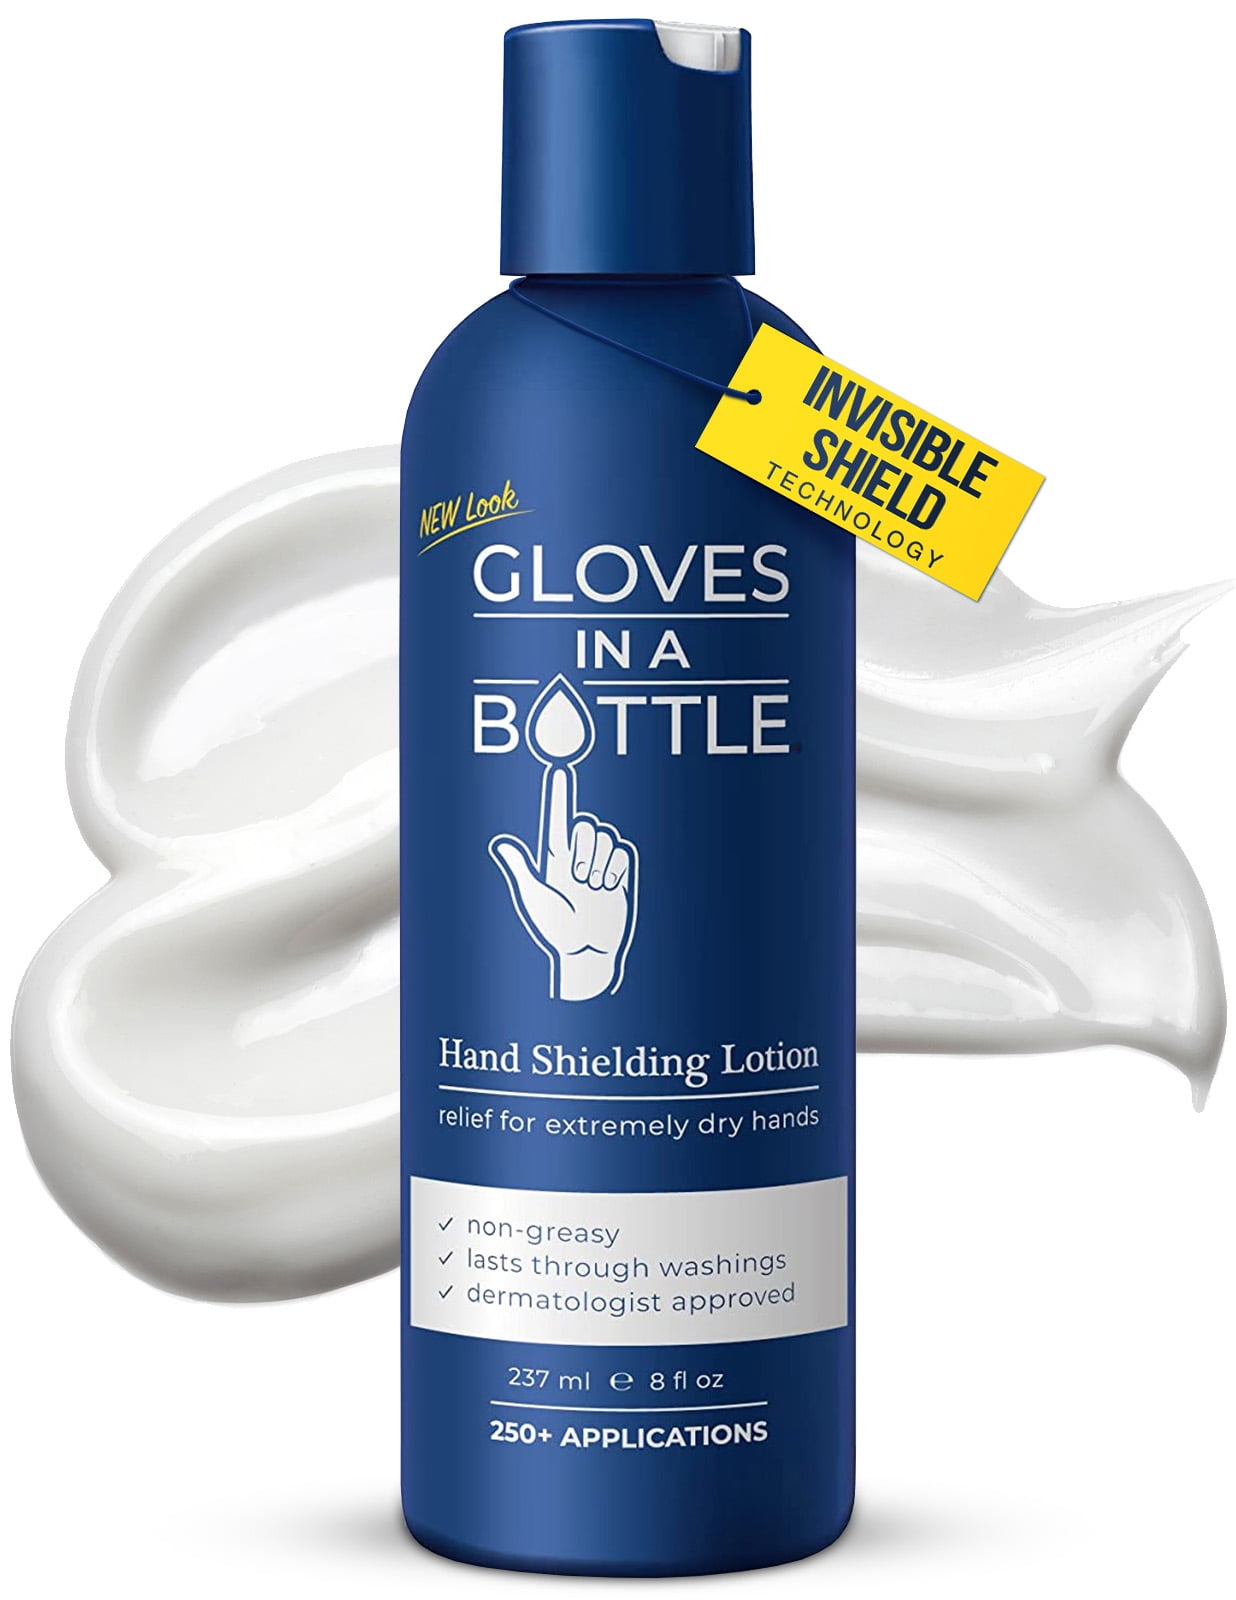 klud mager spændende Gloves In A Bottle – Travelers Friend Hand Lotion Repair Set, Travel Hand  Cream for Dry Hands, Protects & Restores Dry Skin - 8oz (240mL) -  Walmart.com